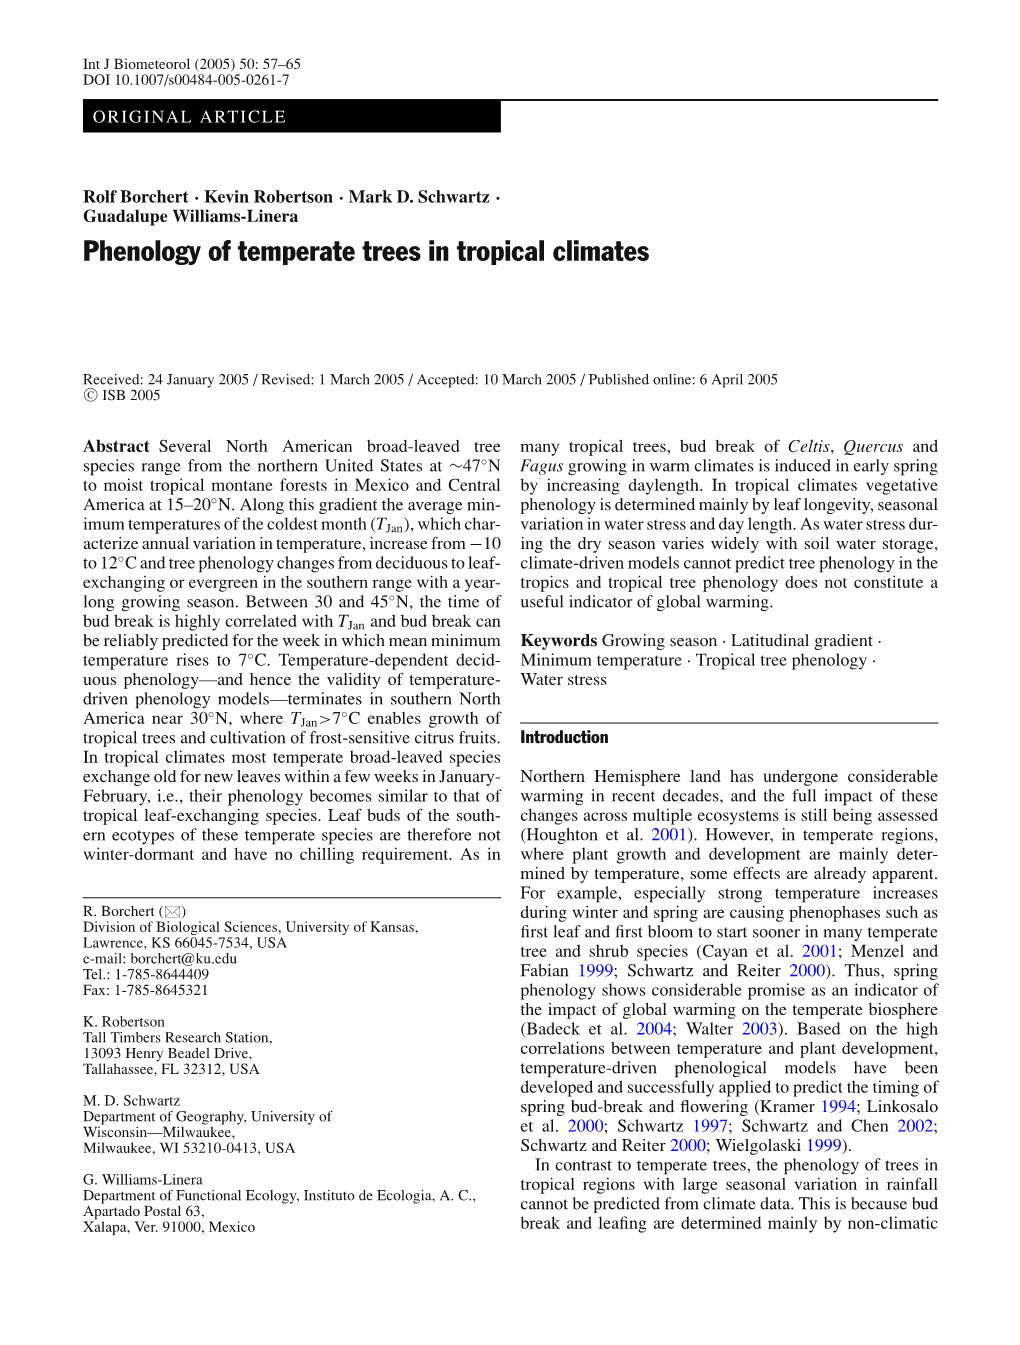 Phenology of Temperate Trees in Tropical Climates